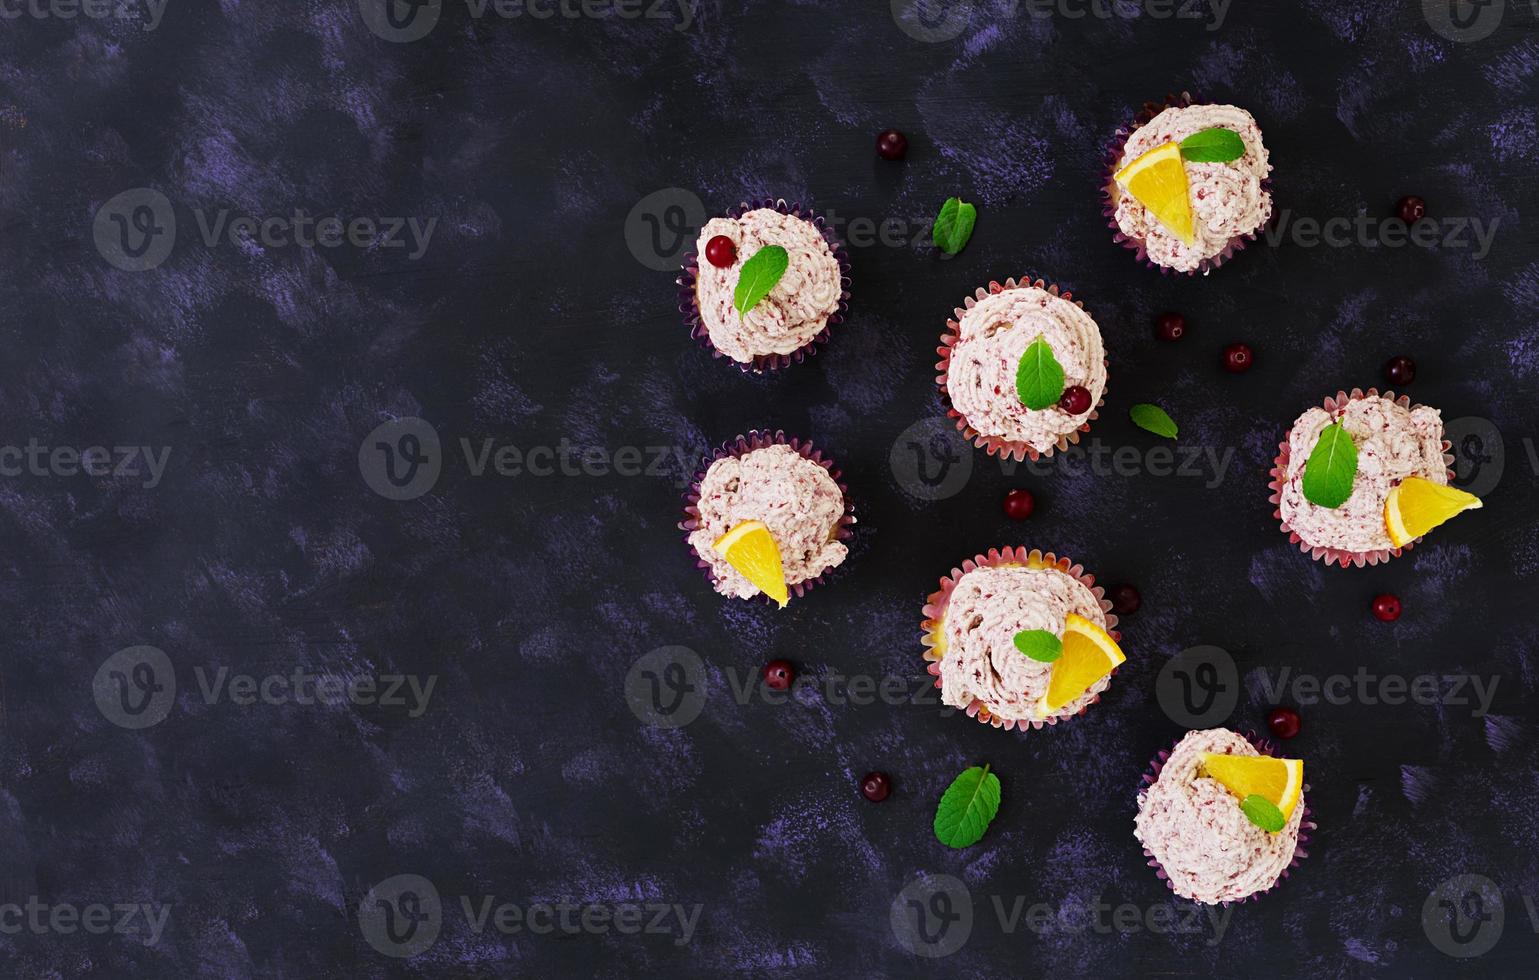 Lemon cupcakes with cherry cream. Cranberry, mint leaves. Food on a dark background. Top view photo